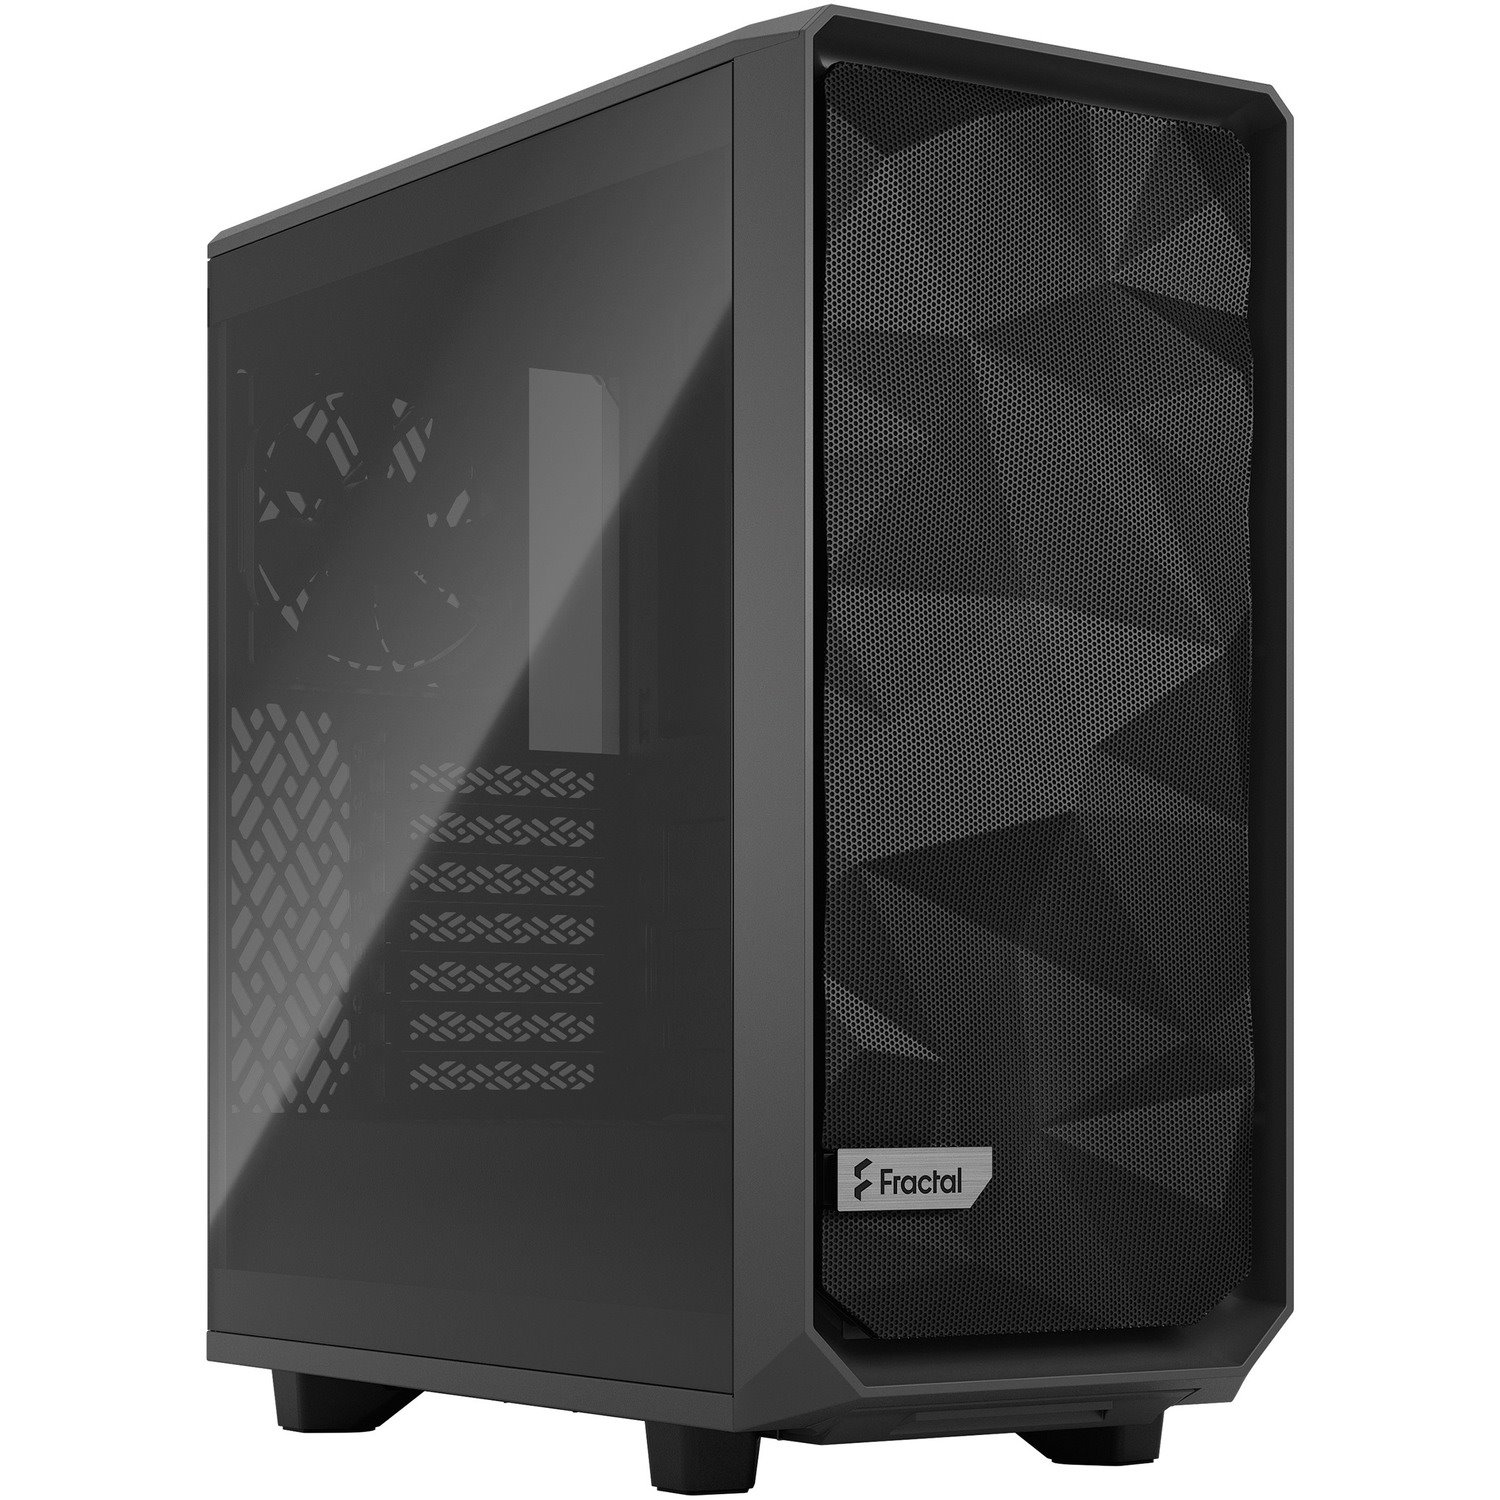 Fractal Design Meshify 2 Compact Computer Case - ATX Motherboard Supported - Mid-tower - Tempered Glass, Steel, Mesh - Grey